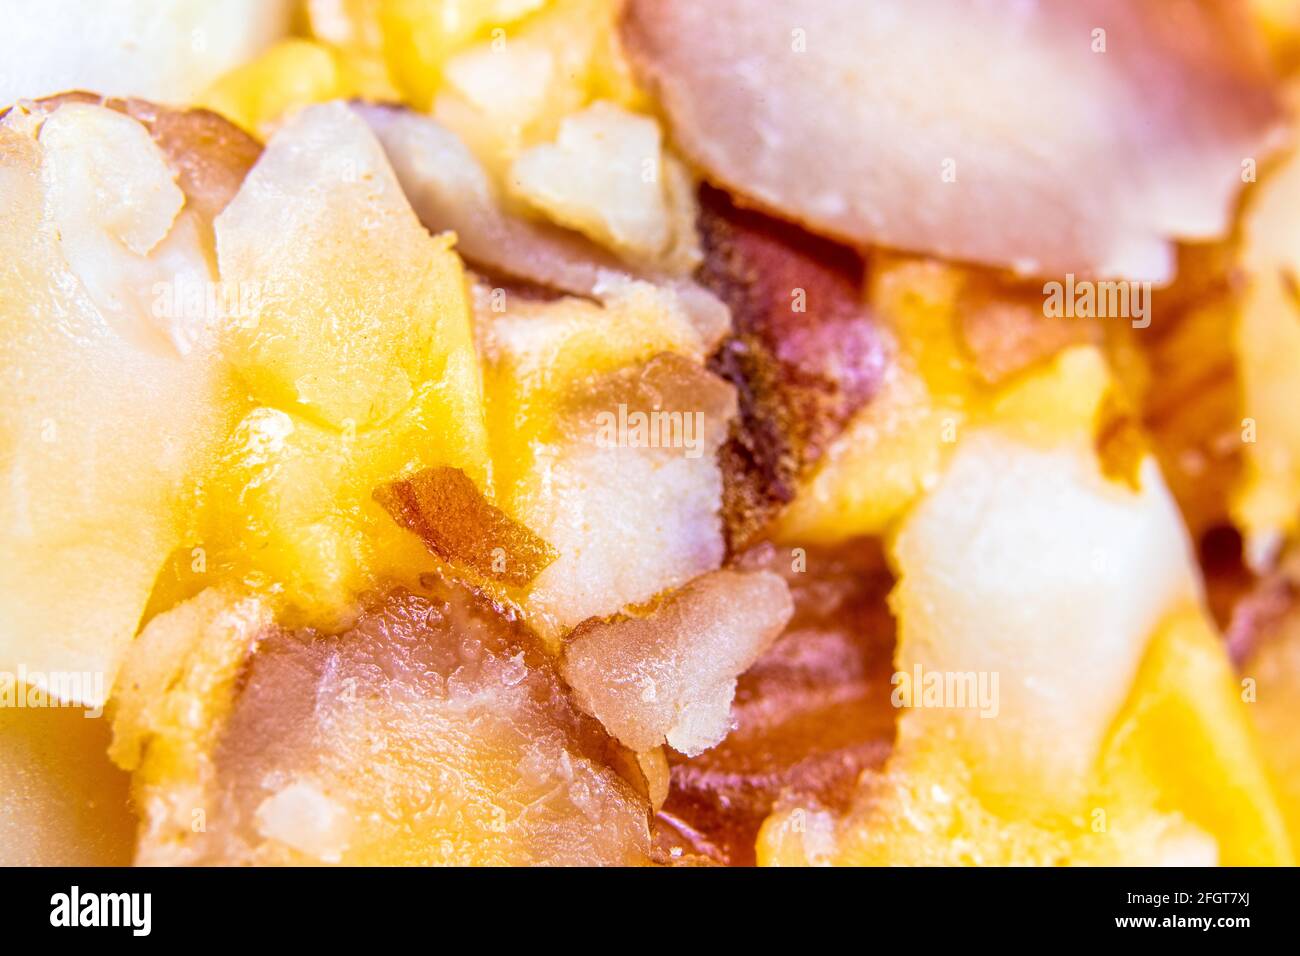 Cheddar cheese with almond shavings Stock Photo